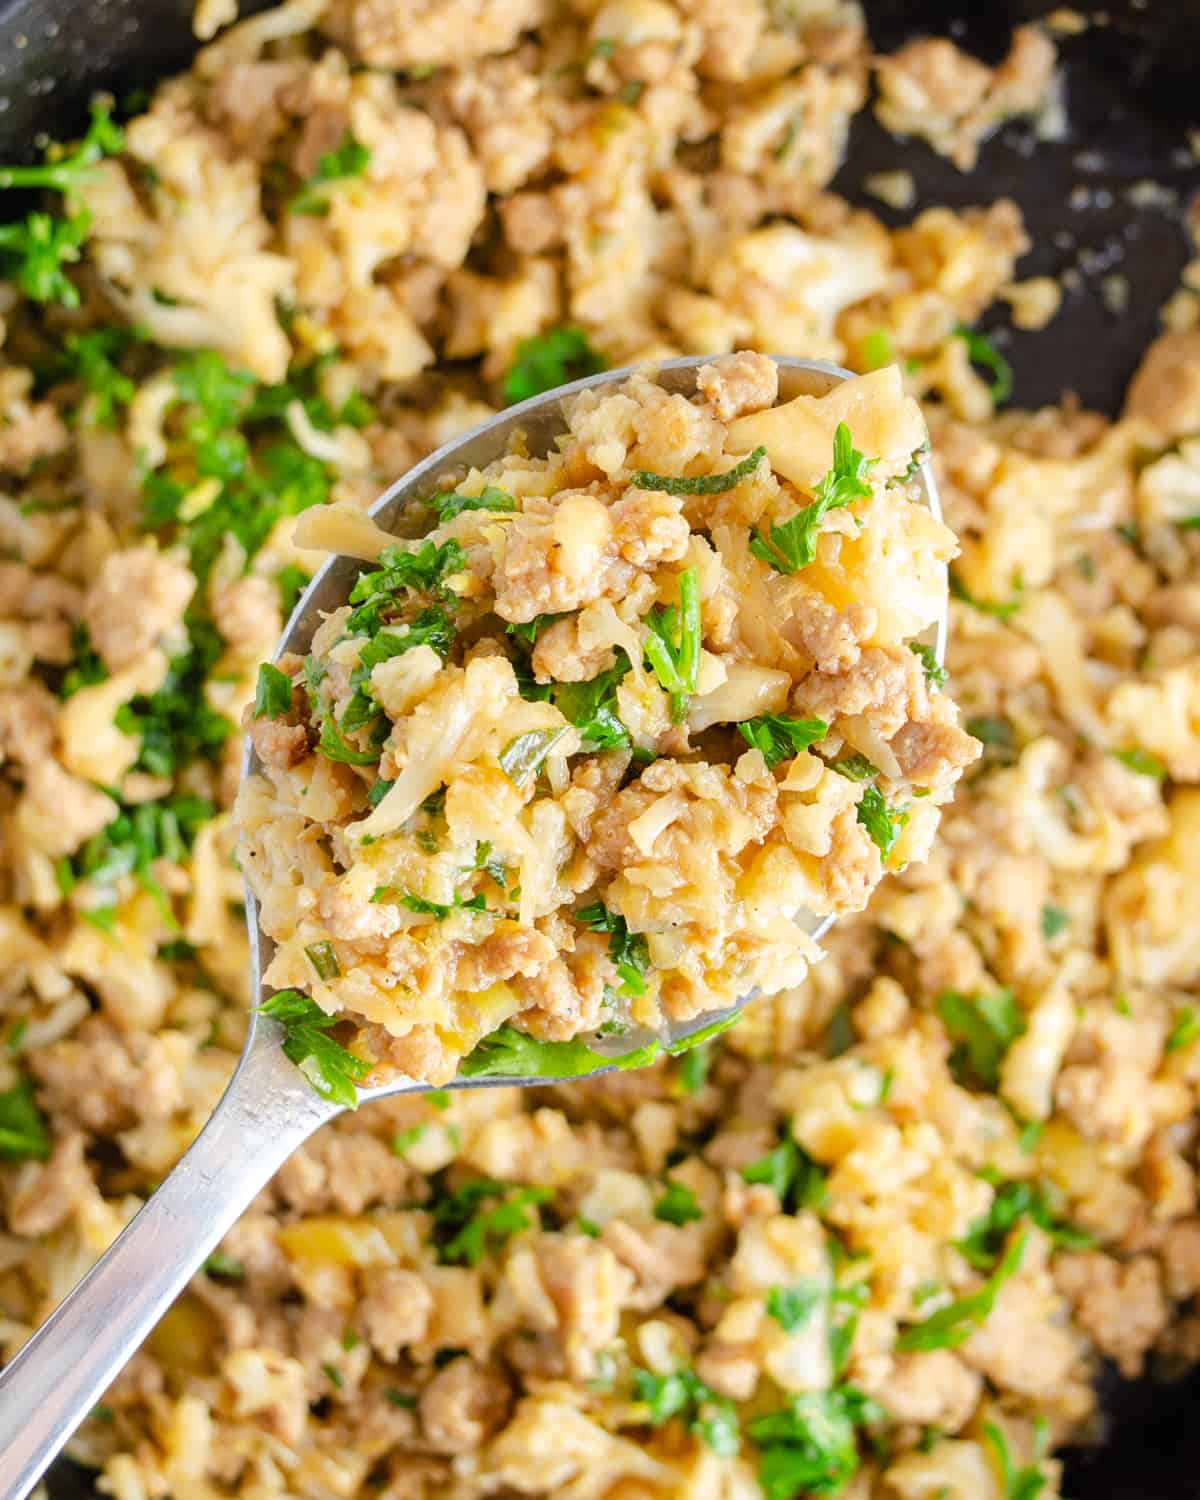 Low carb cauliflower stuffing on a spoon